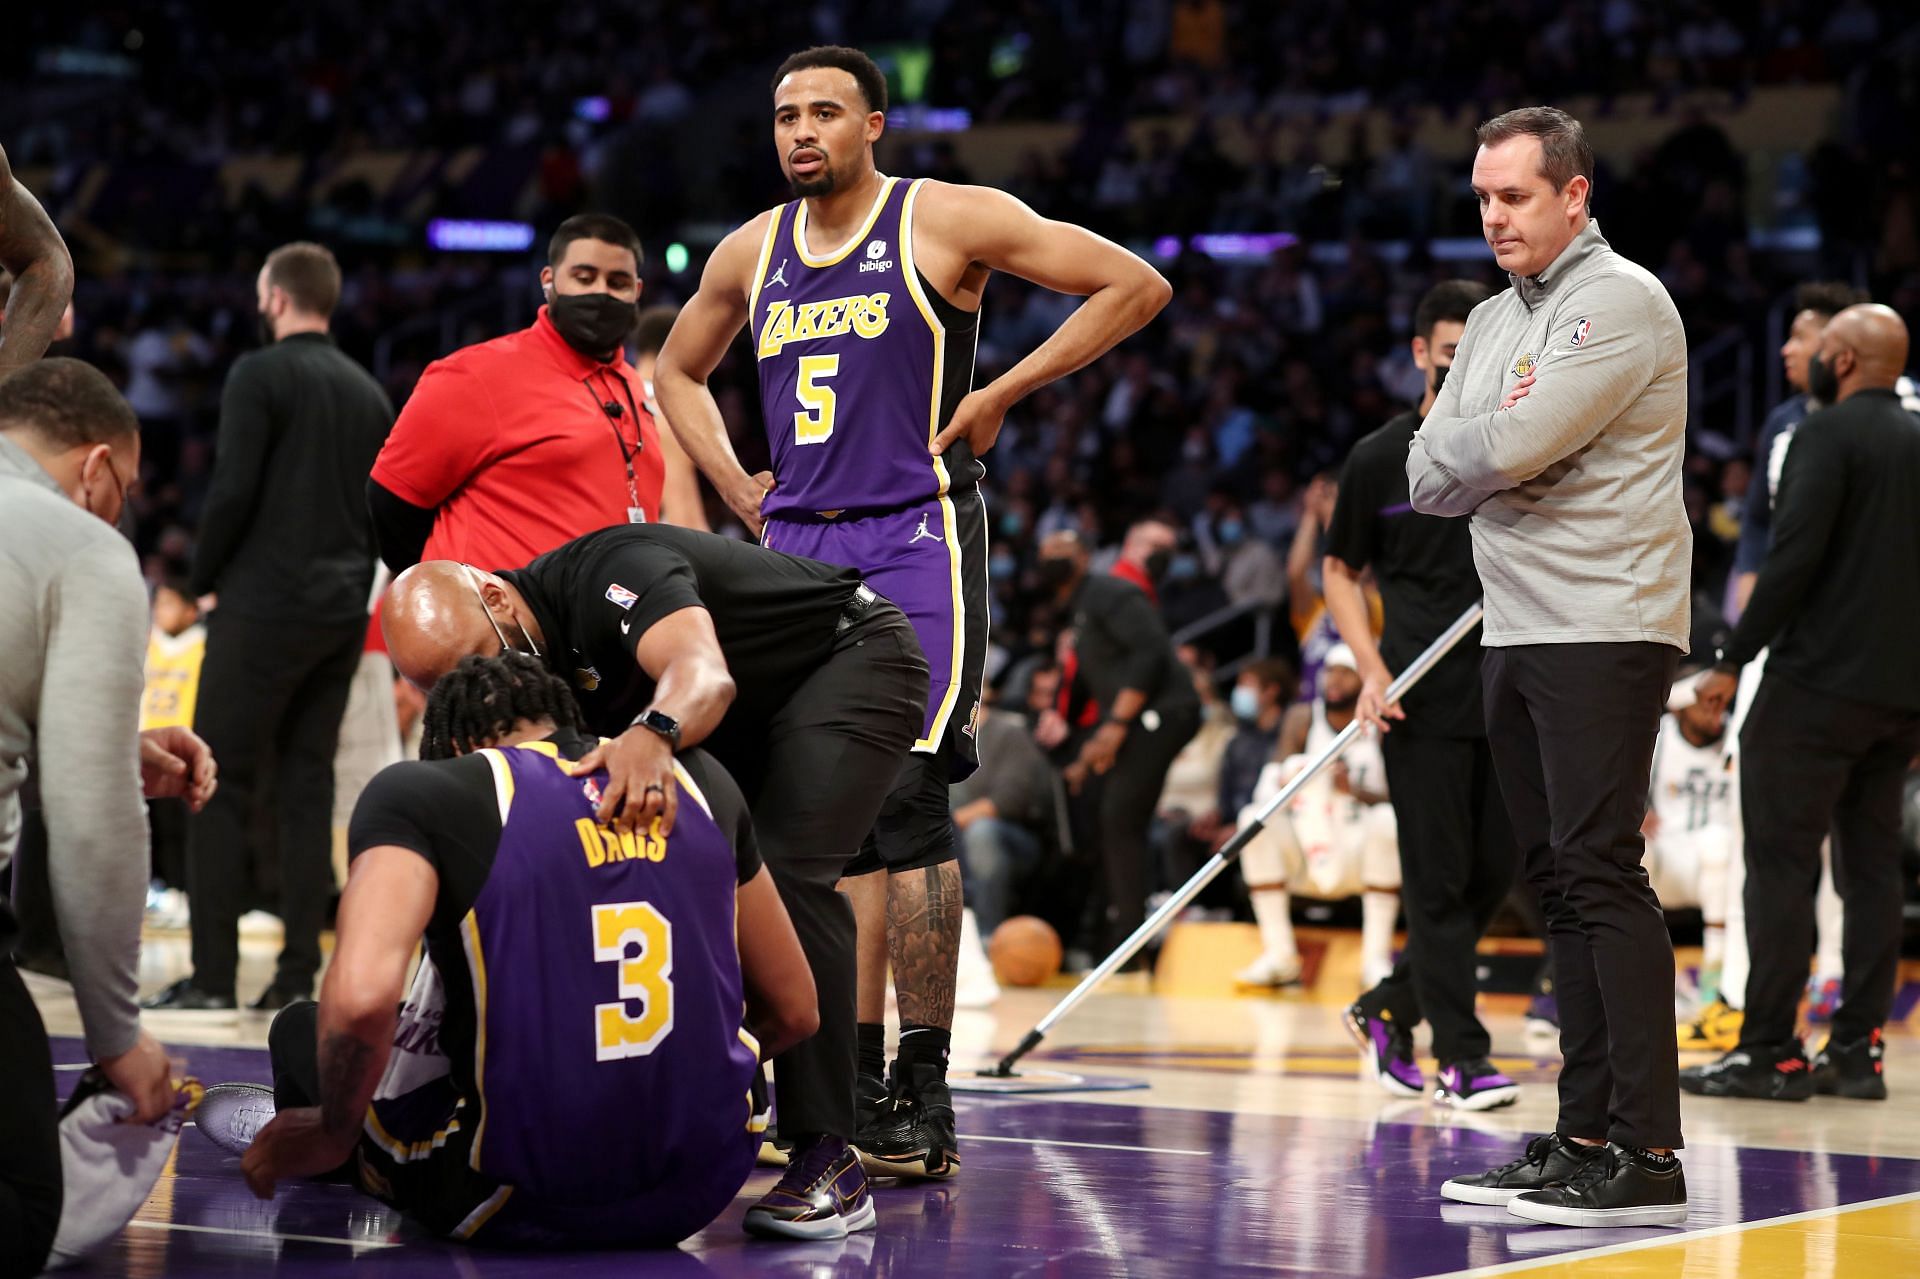 Talen Horton-Tucker (5) and coach Frank Vogel of the LA Lakers check up on Anthony Davis after an injury during the second quarter against the Utah Jazz on Wednesday in Los Angeles, California.